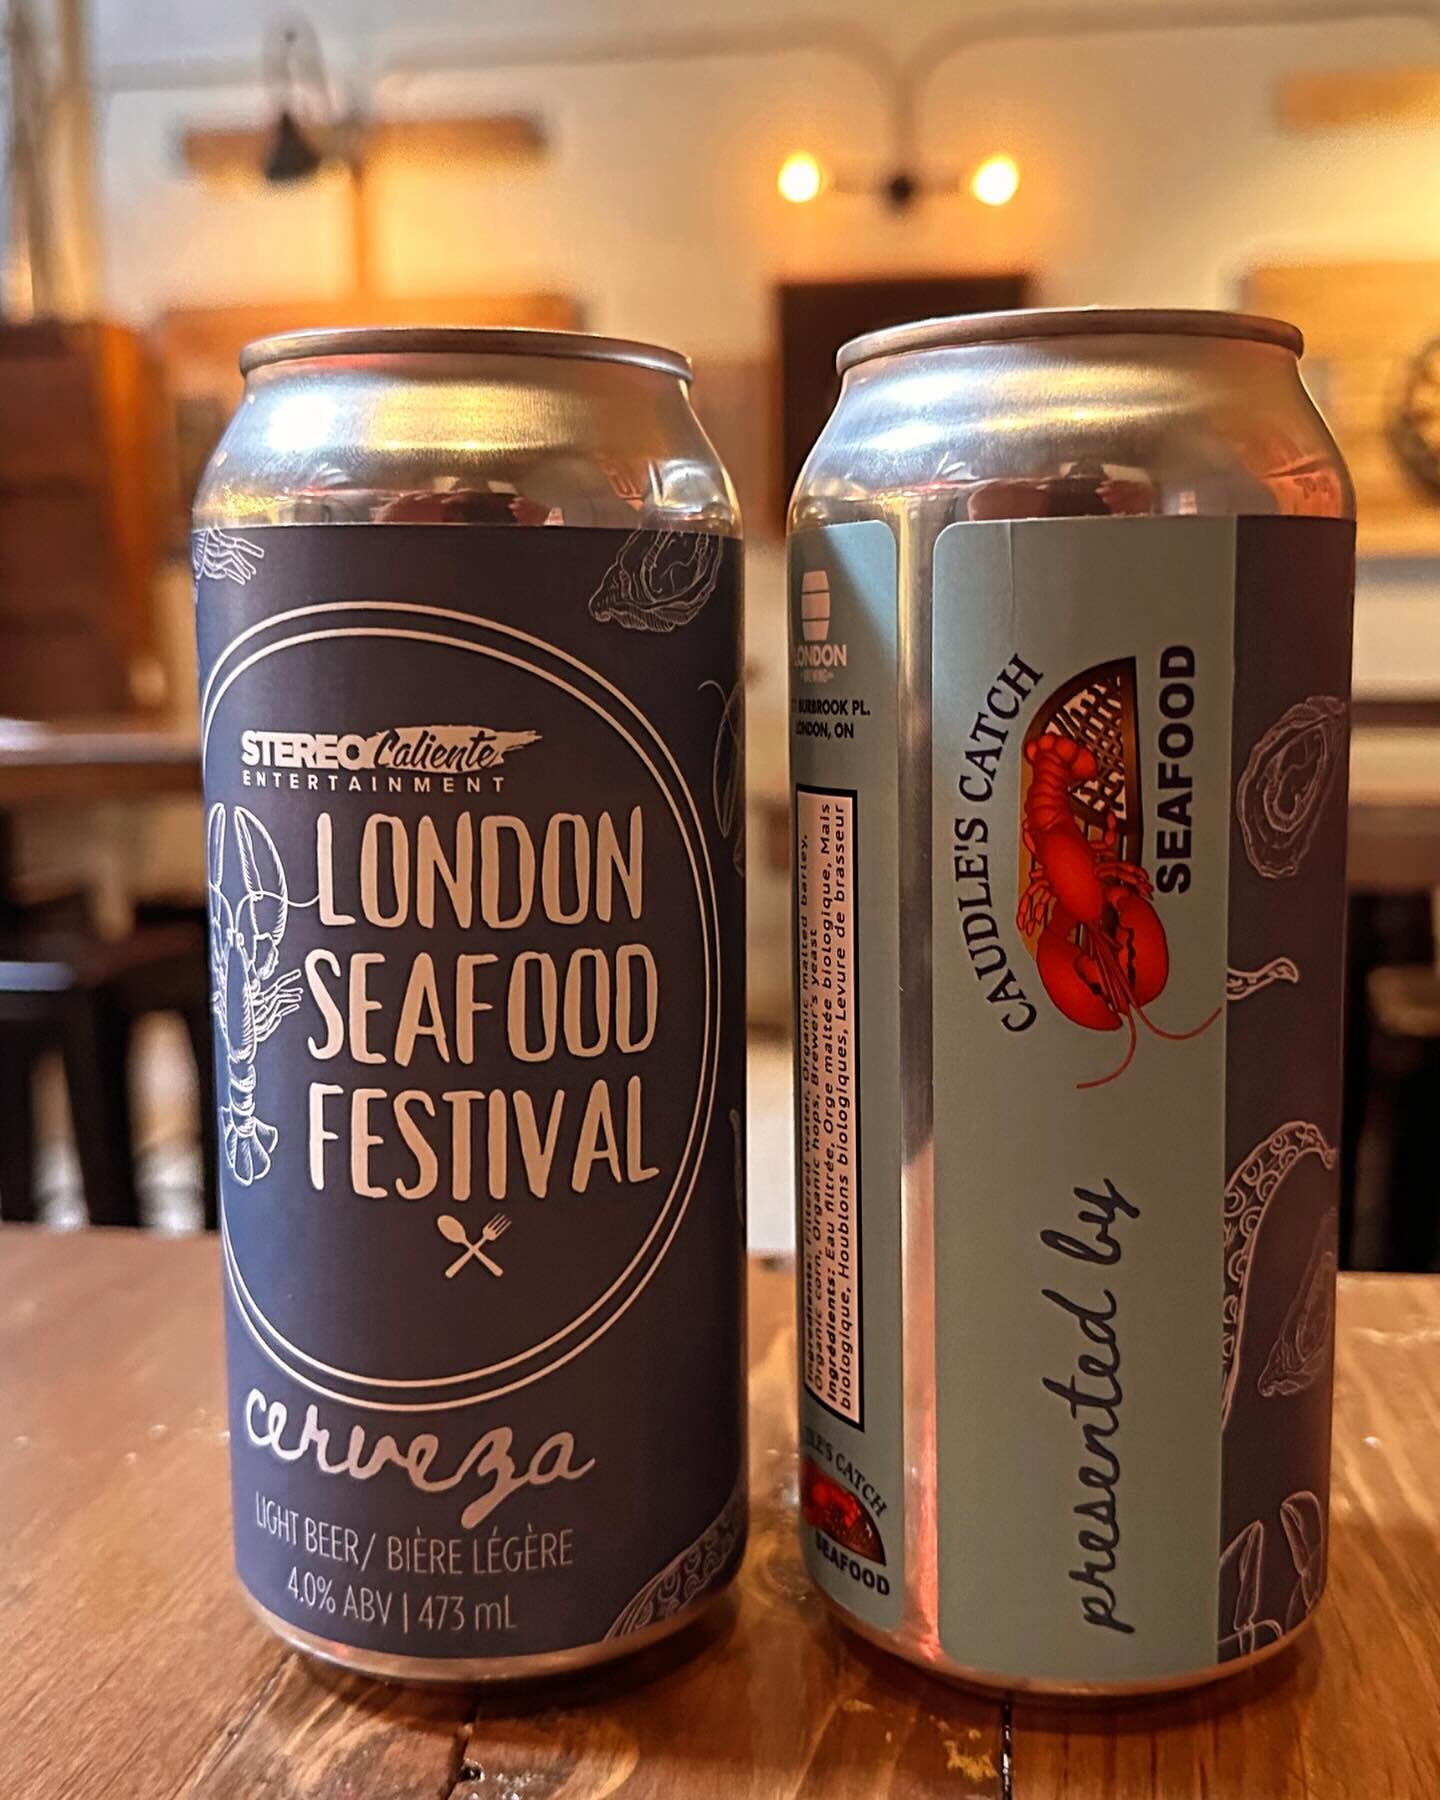 London Seafood Festival beer &ldquo;Cerveza&rdquo; is the perfect beer for a seafood pairing, Great Collab with local businesses @londonbrewingca  London Seafood Festival presented by @caudlescatch